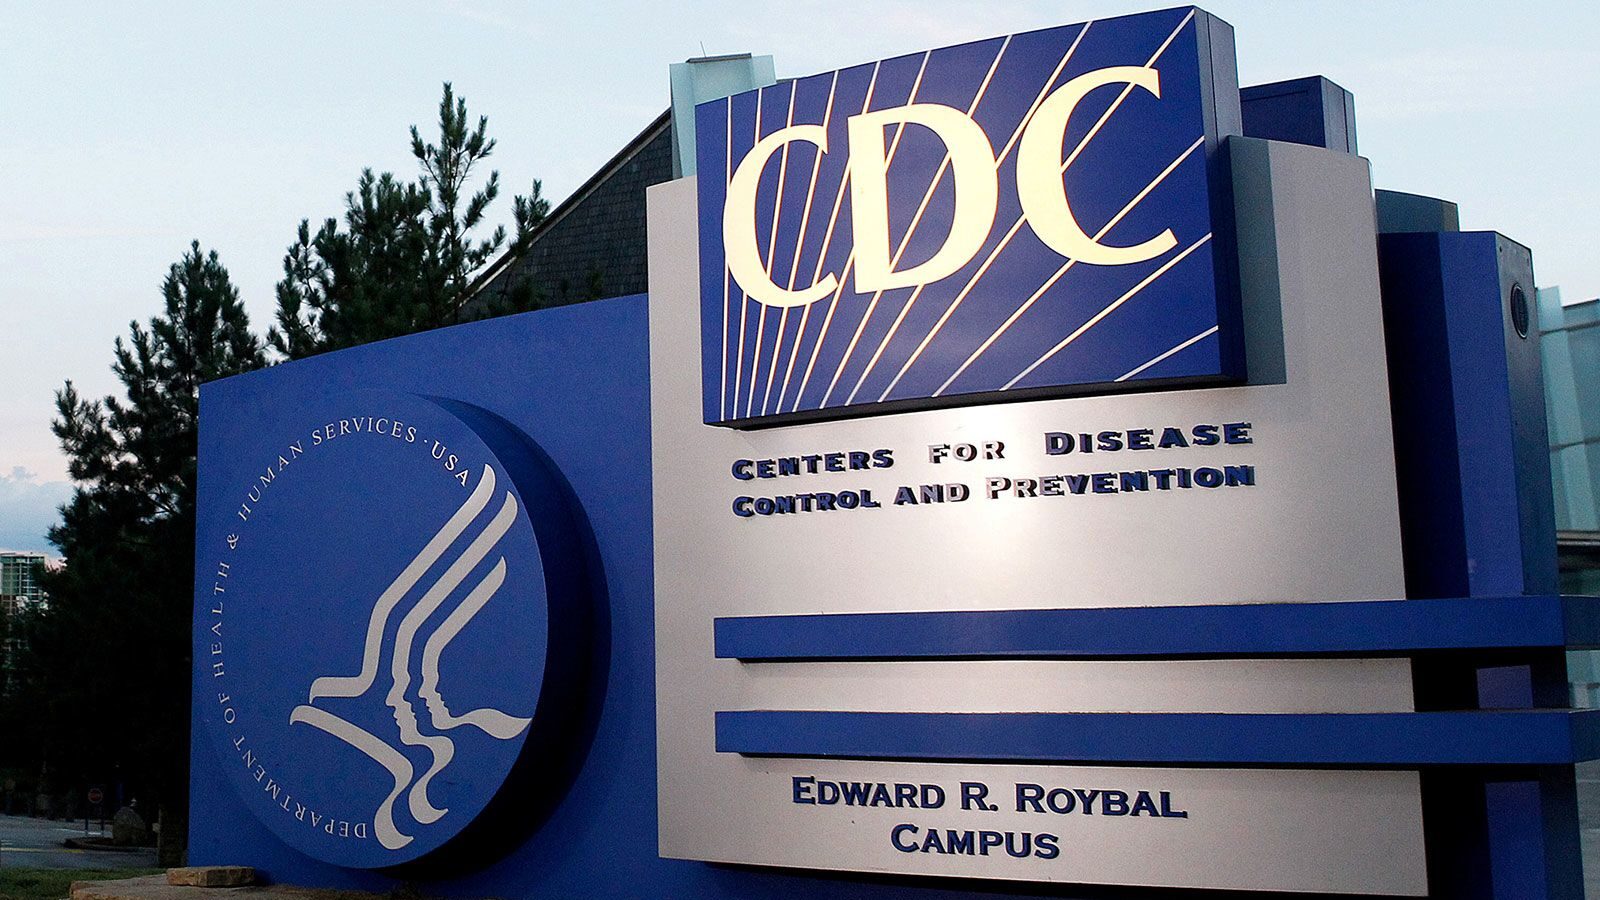 cdc sign shown, the agency updated its covid guidelines...